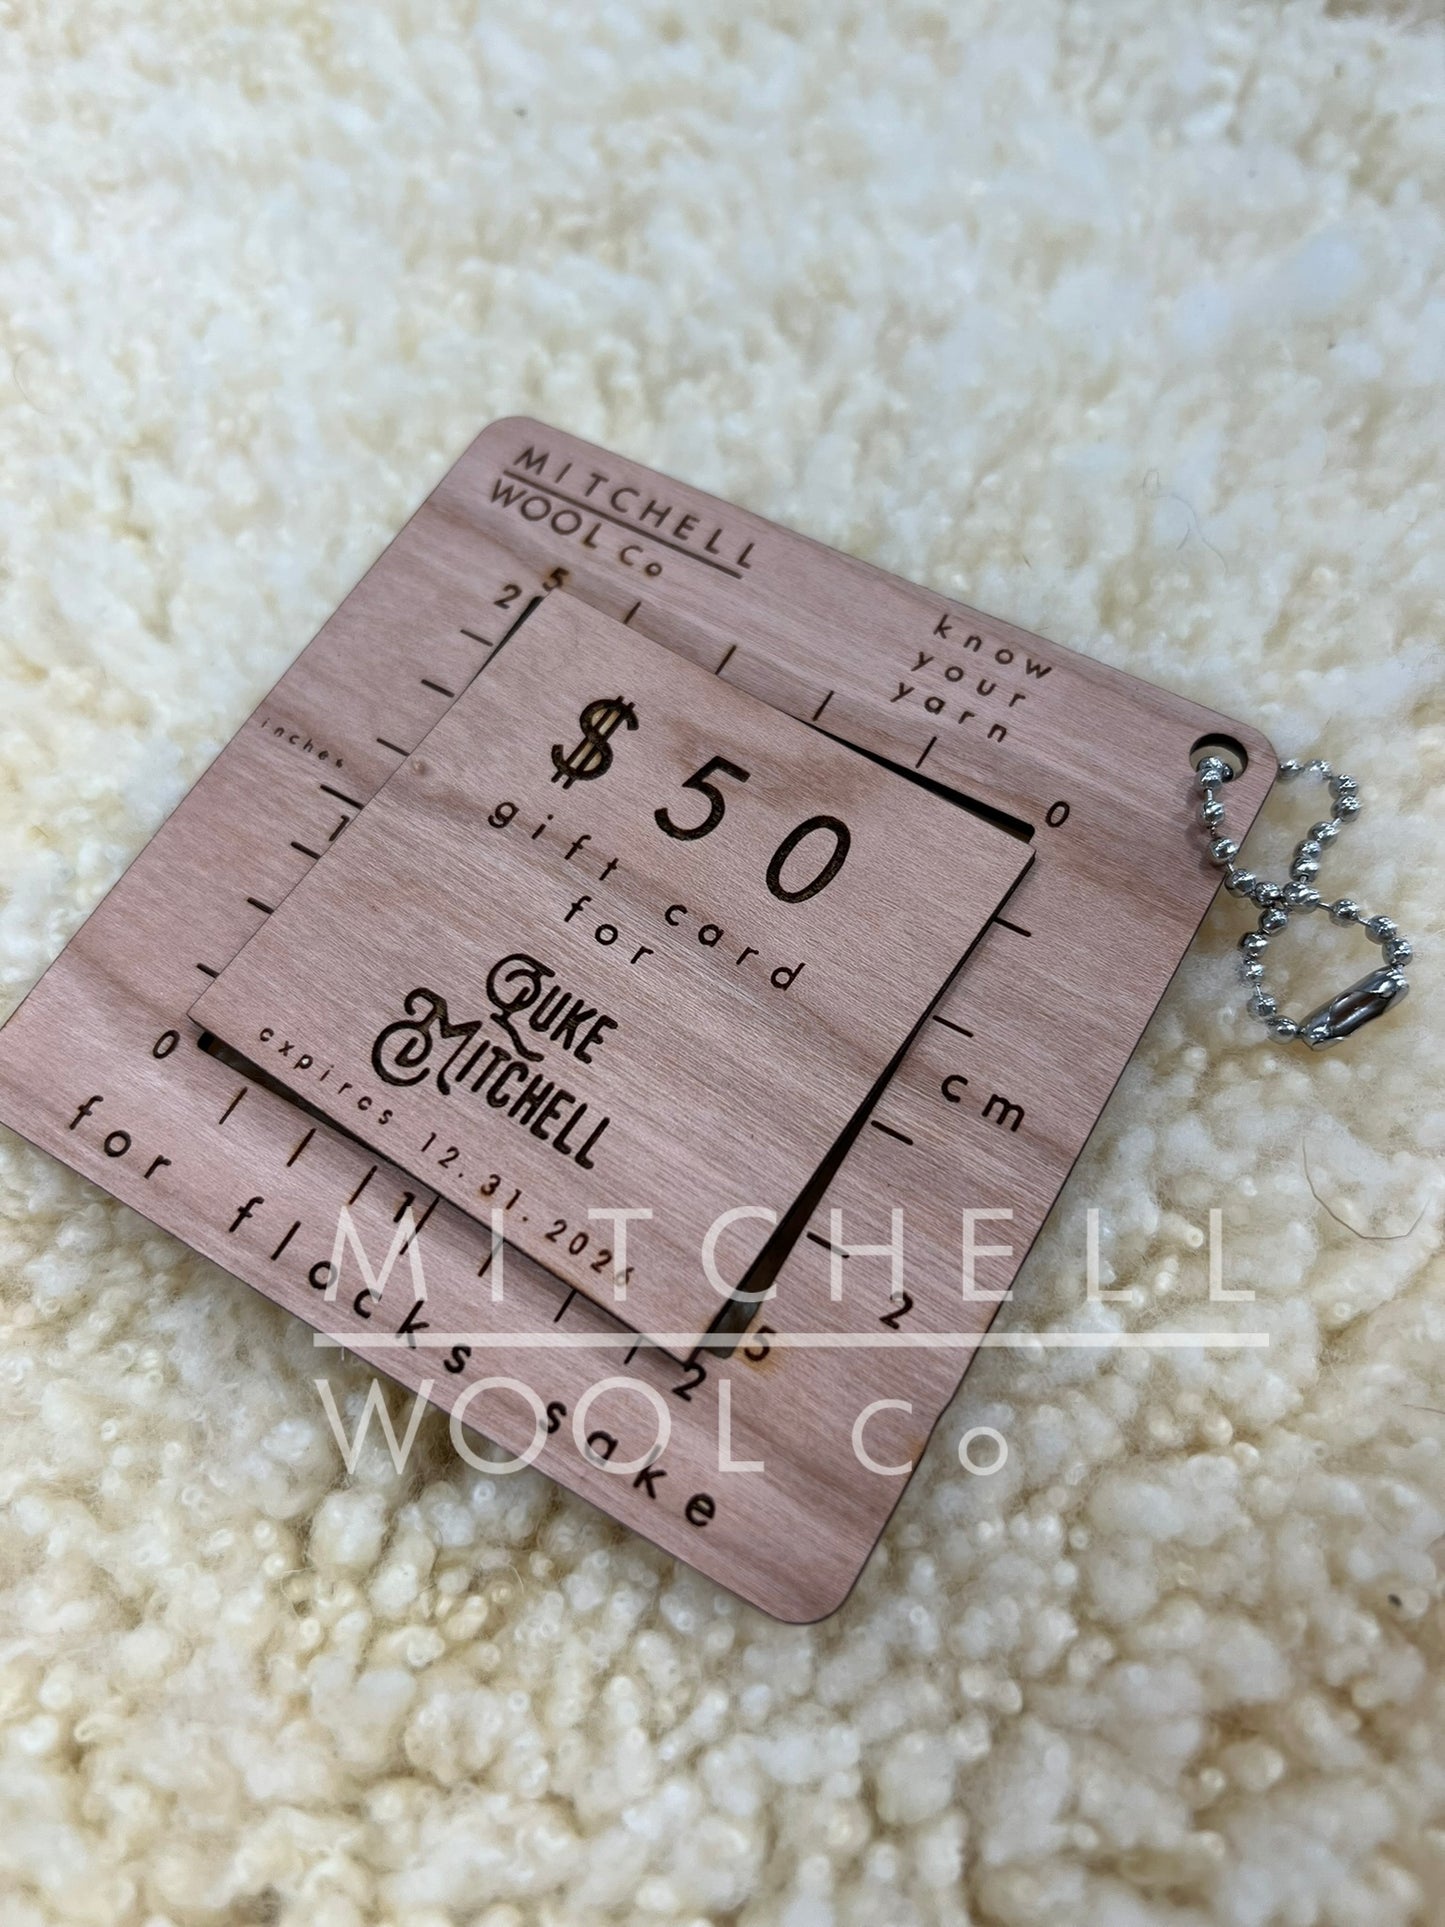 Our laser cut gift card sits on a lambswool pelt.